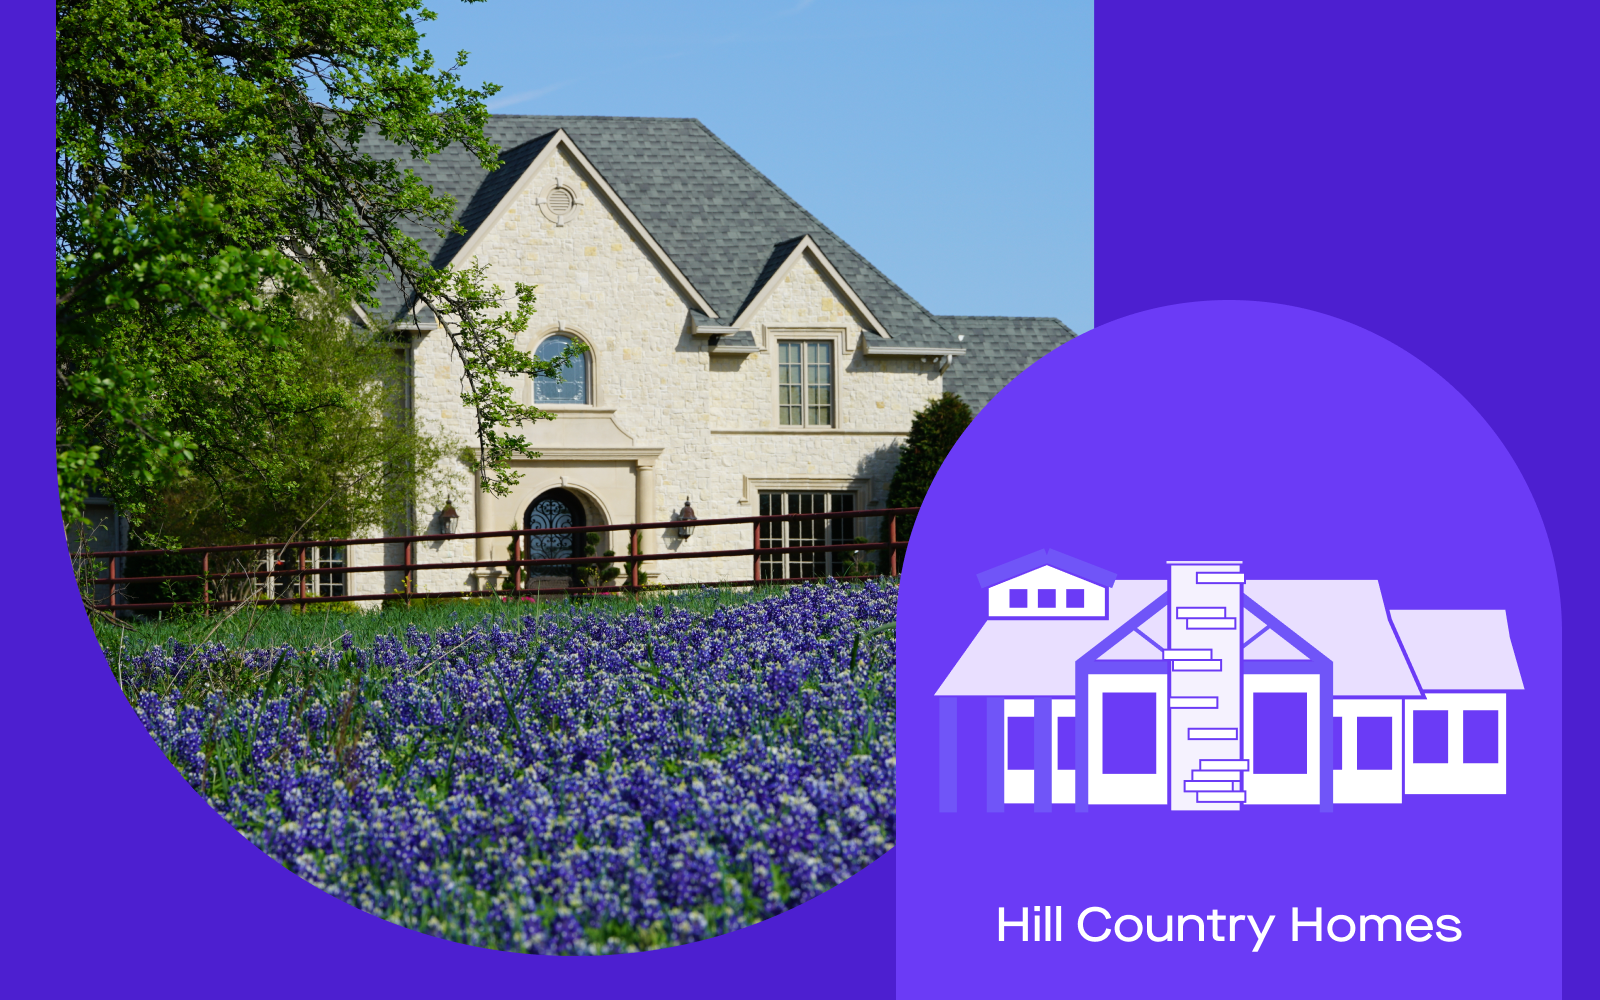 Image of Hill Country style homes in Austin, Texas